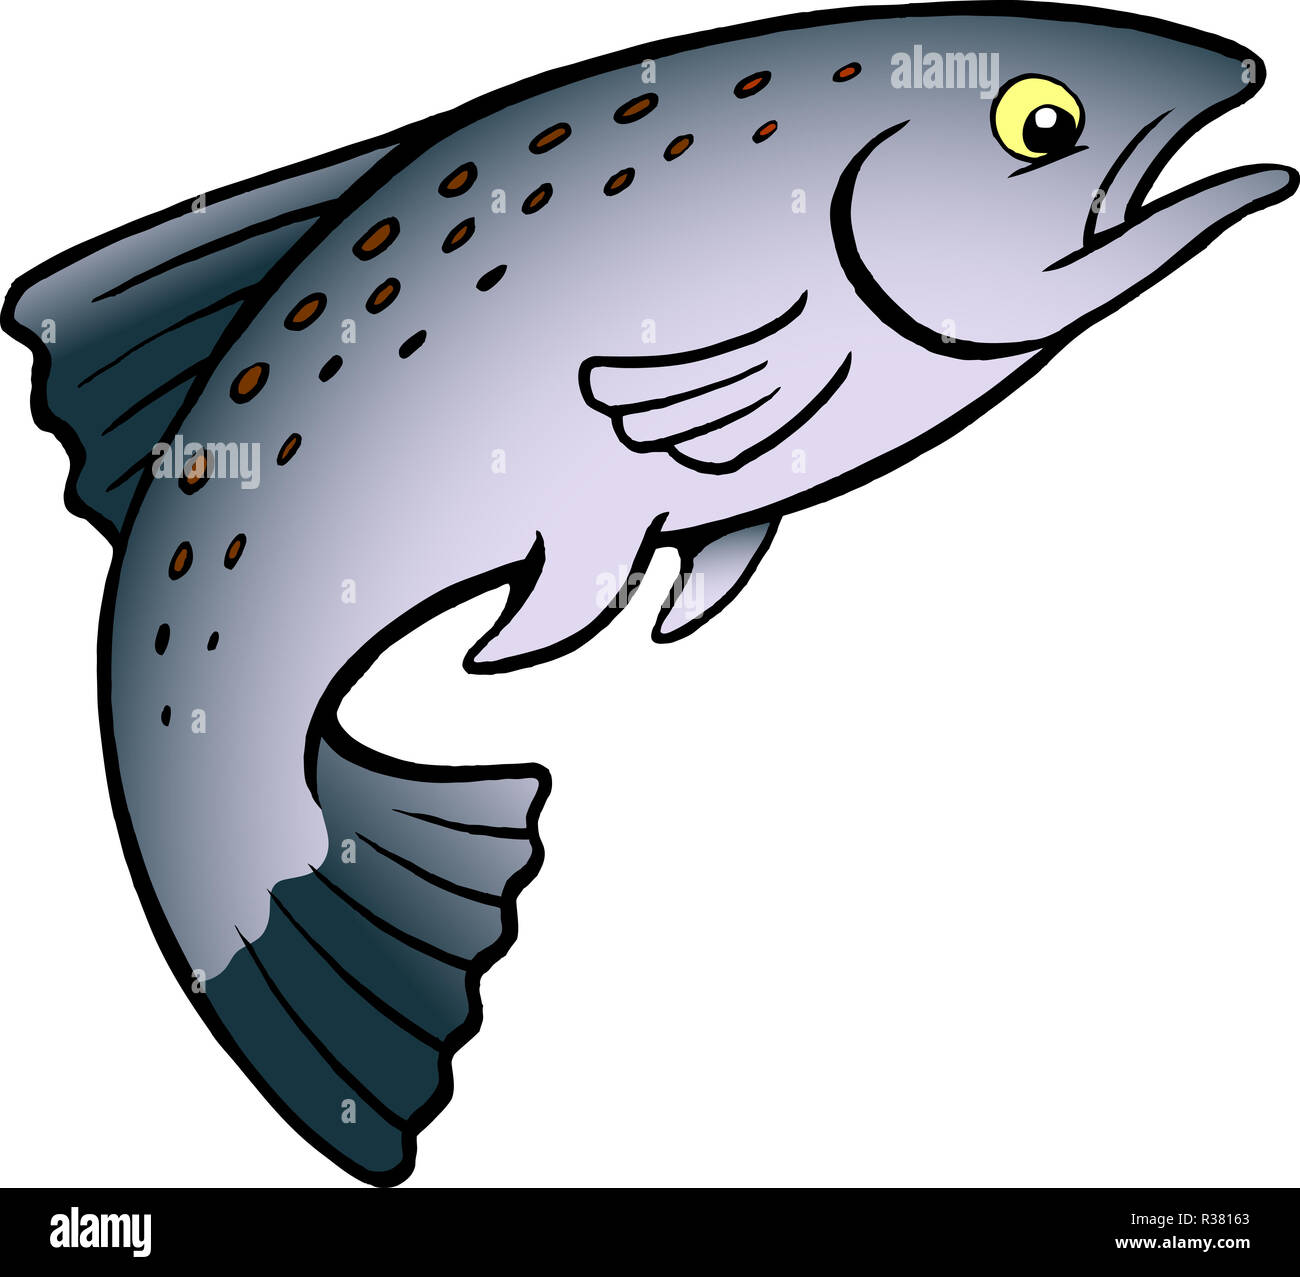 https://c8.alamy.com/comp/R38163/cartoon-vector-illustration-of-a-salmon-or-trout-fish-R38163.jpg